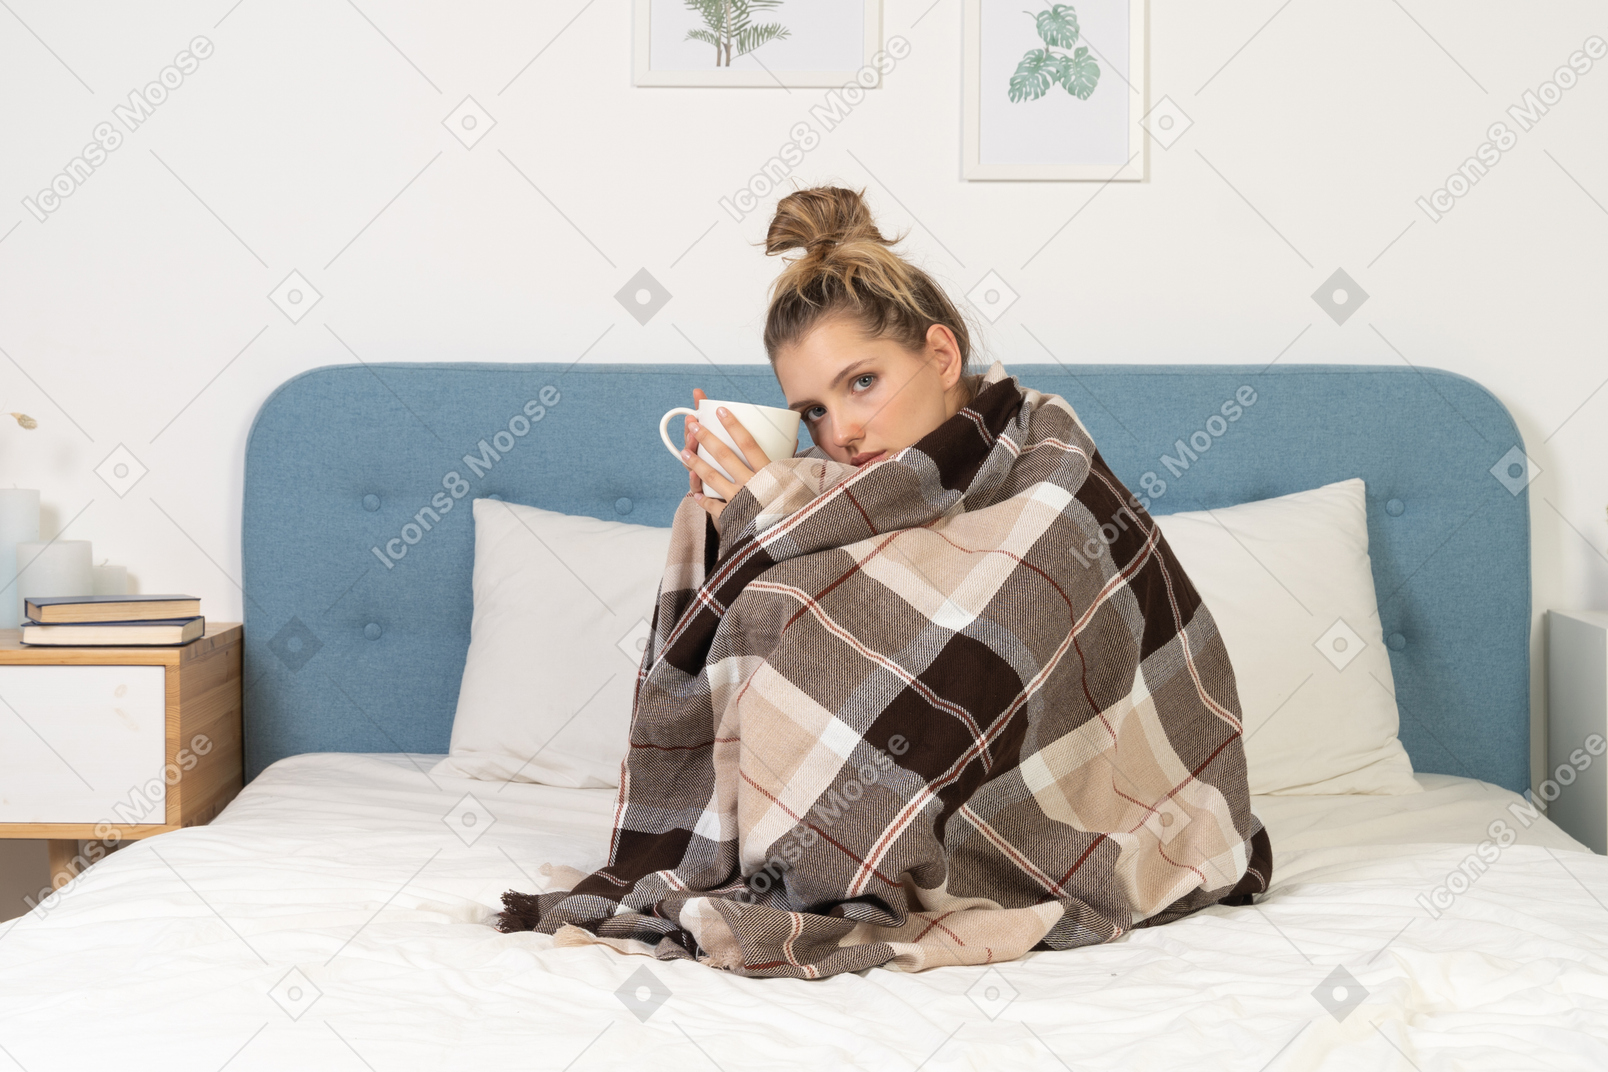 Side view of an ill young lady wrapped in checked blanket in bed holding a cup of tea